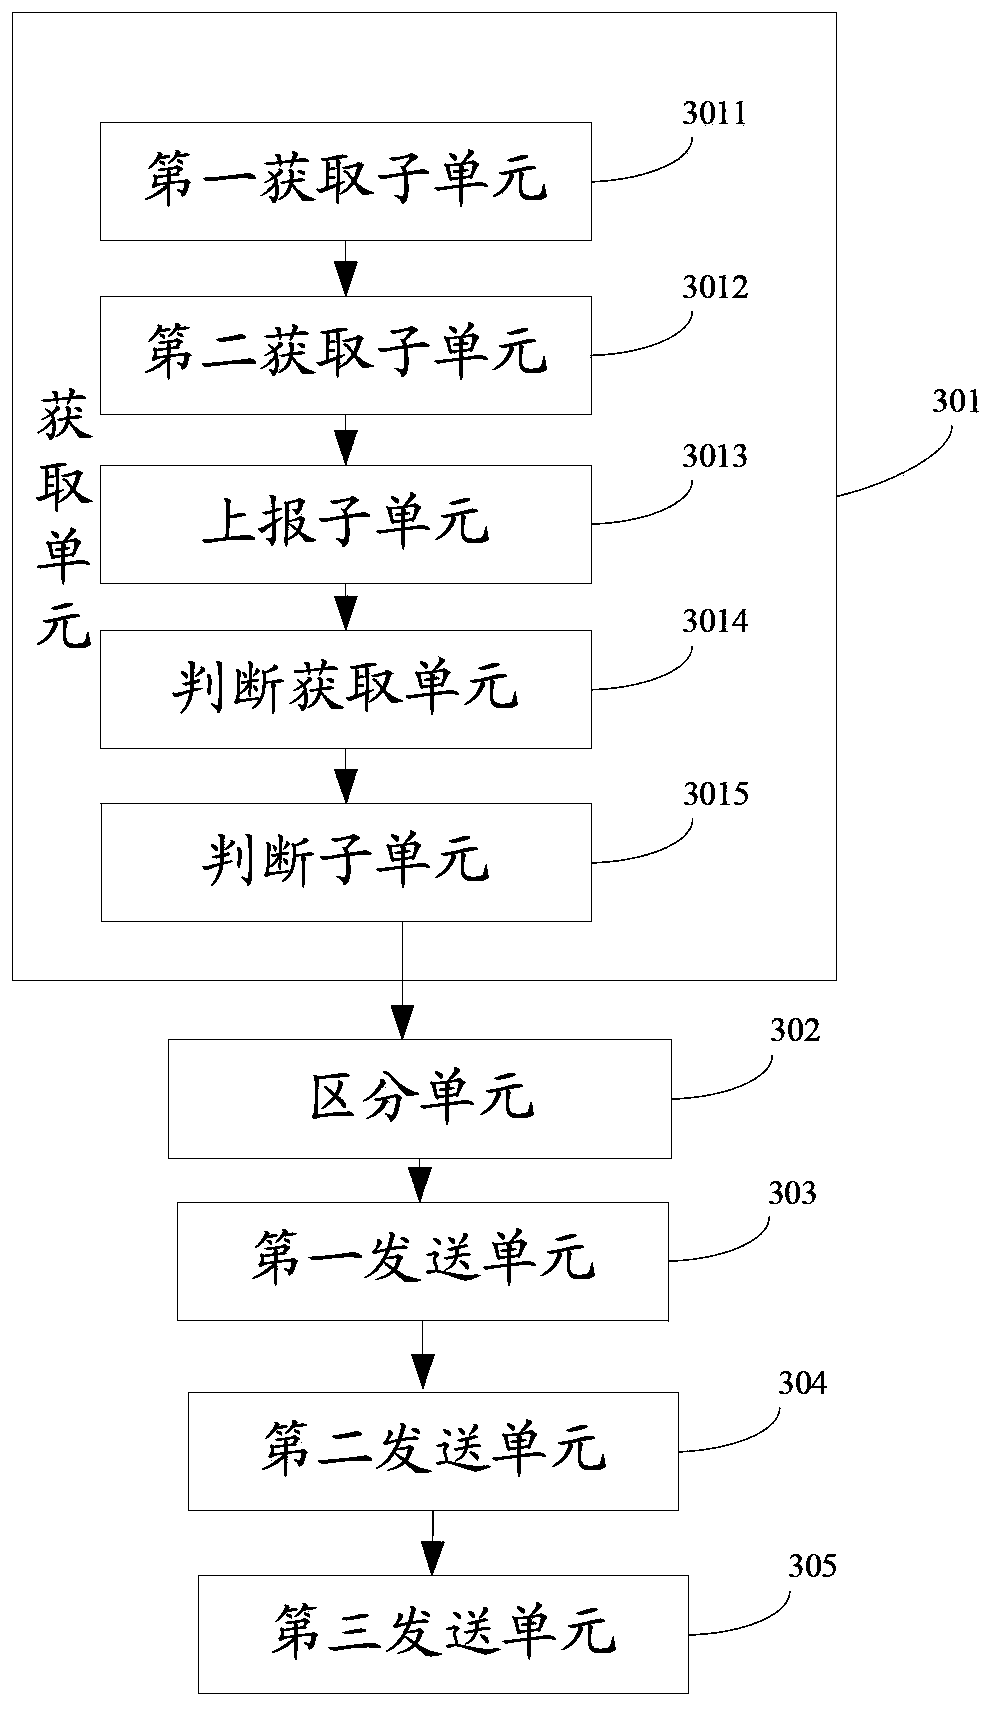 Method and system for distinguishing users